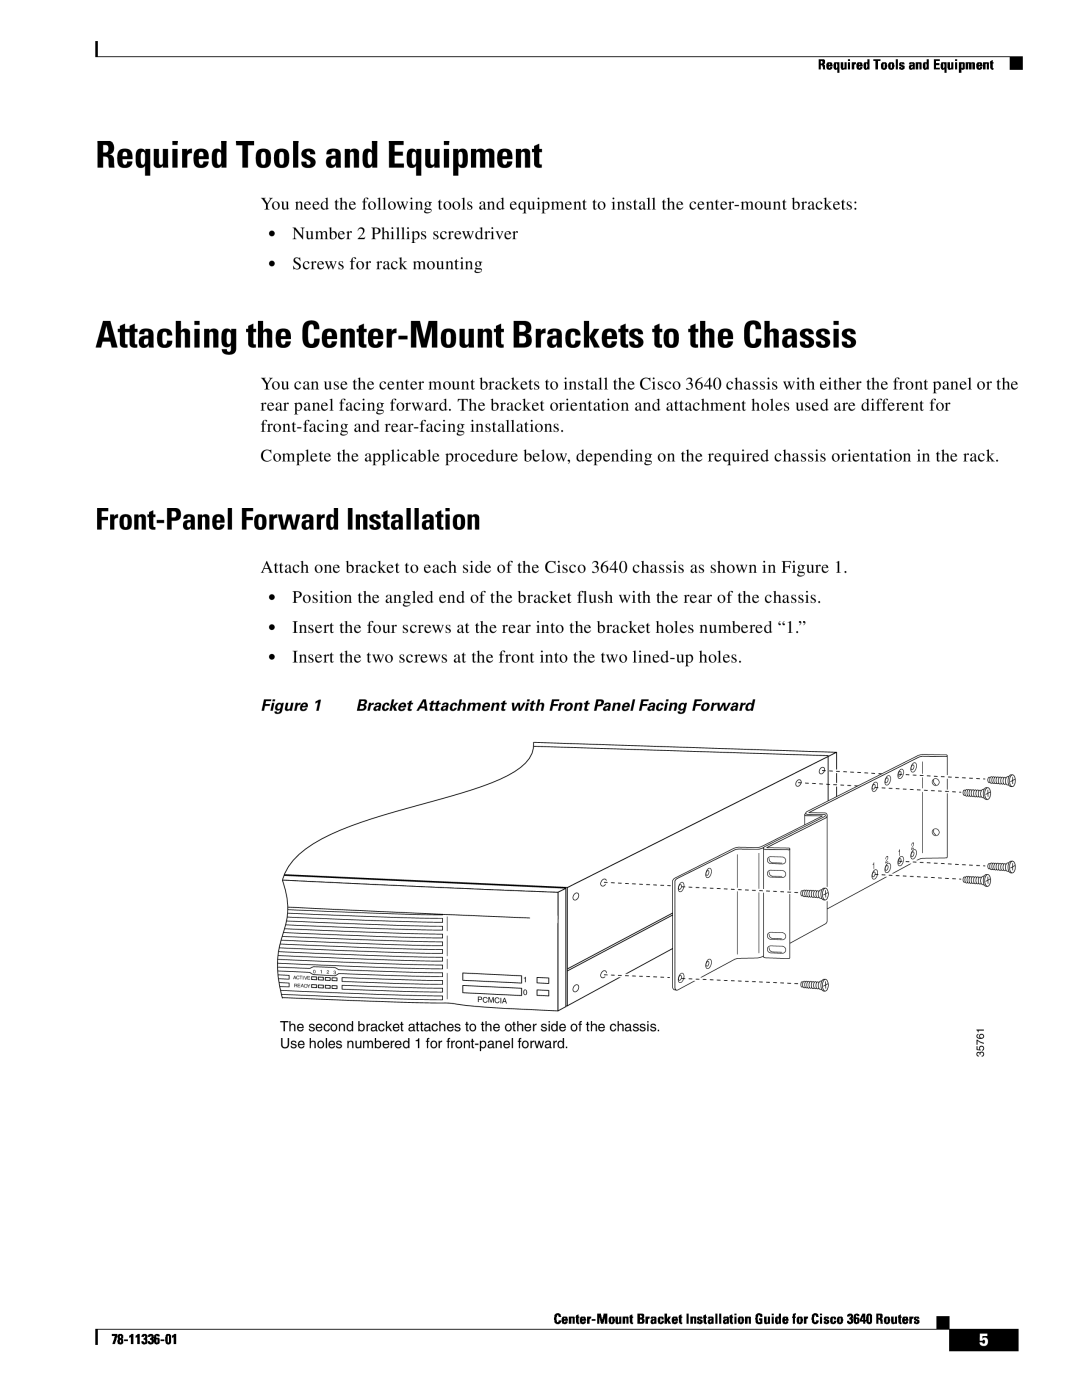 Cisco Systems 3640 manual Required Tools and Equipment, Attaching the Center-Mount Brackets to the Chassis 